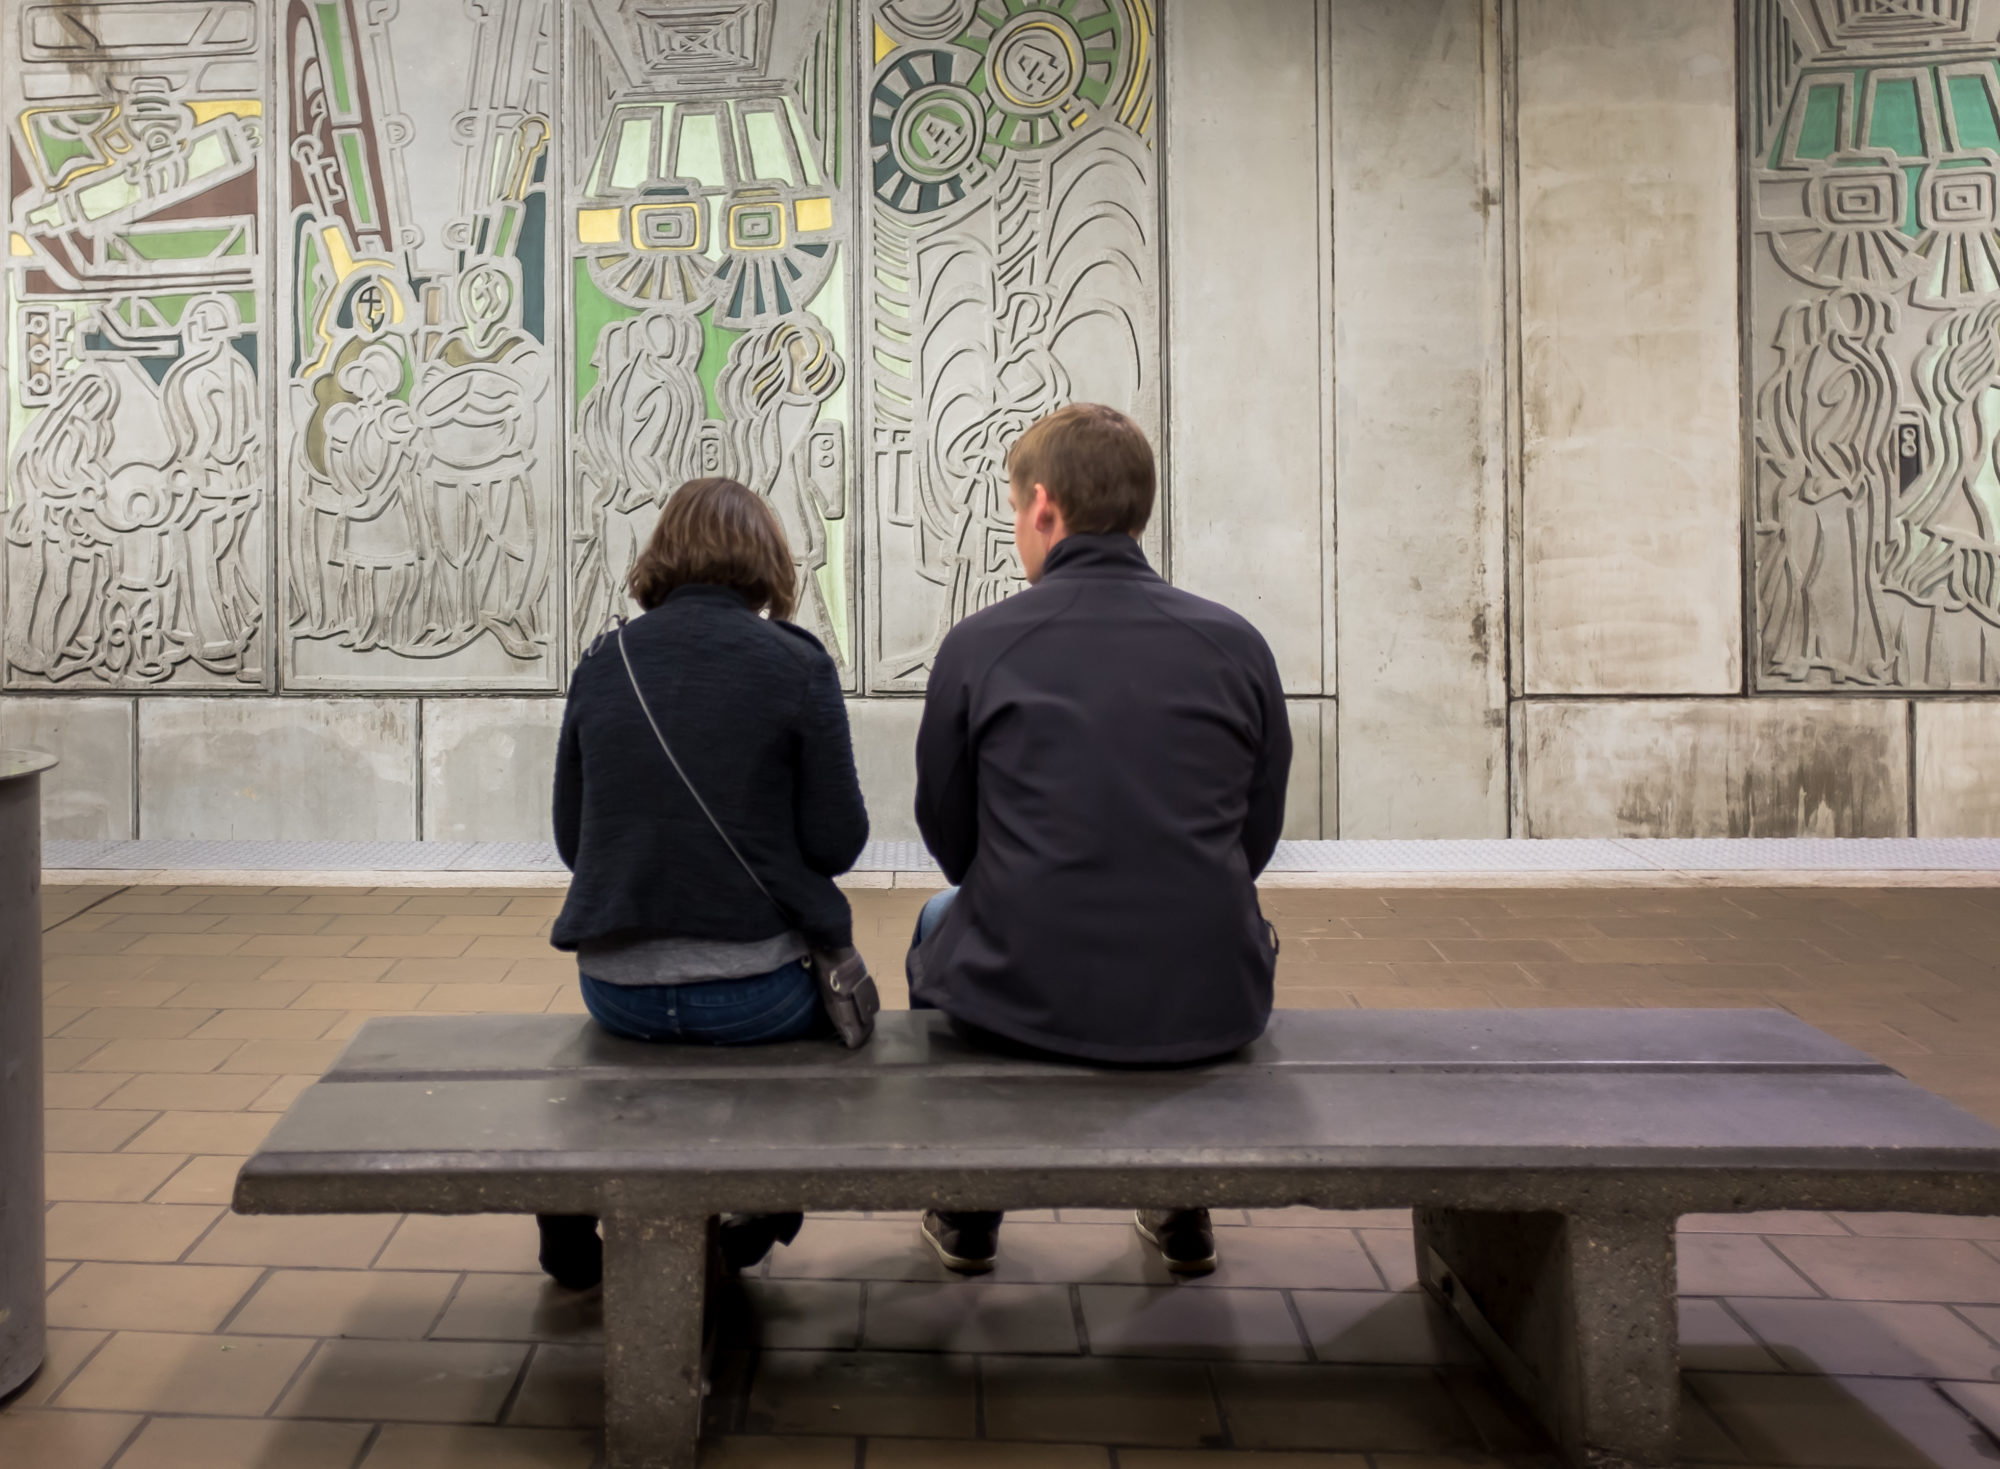 A man and woman sit on a bench facing a carved mural